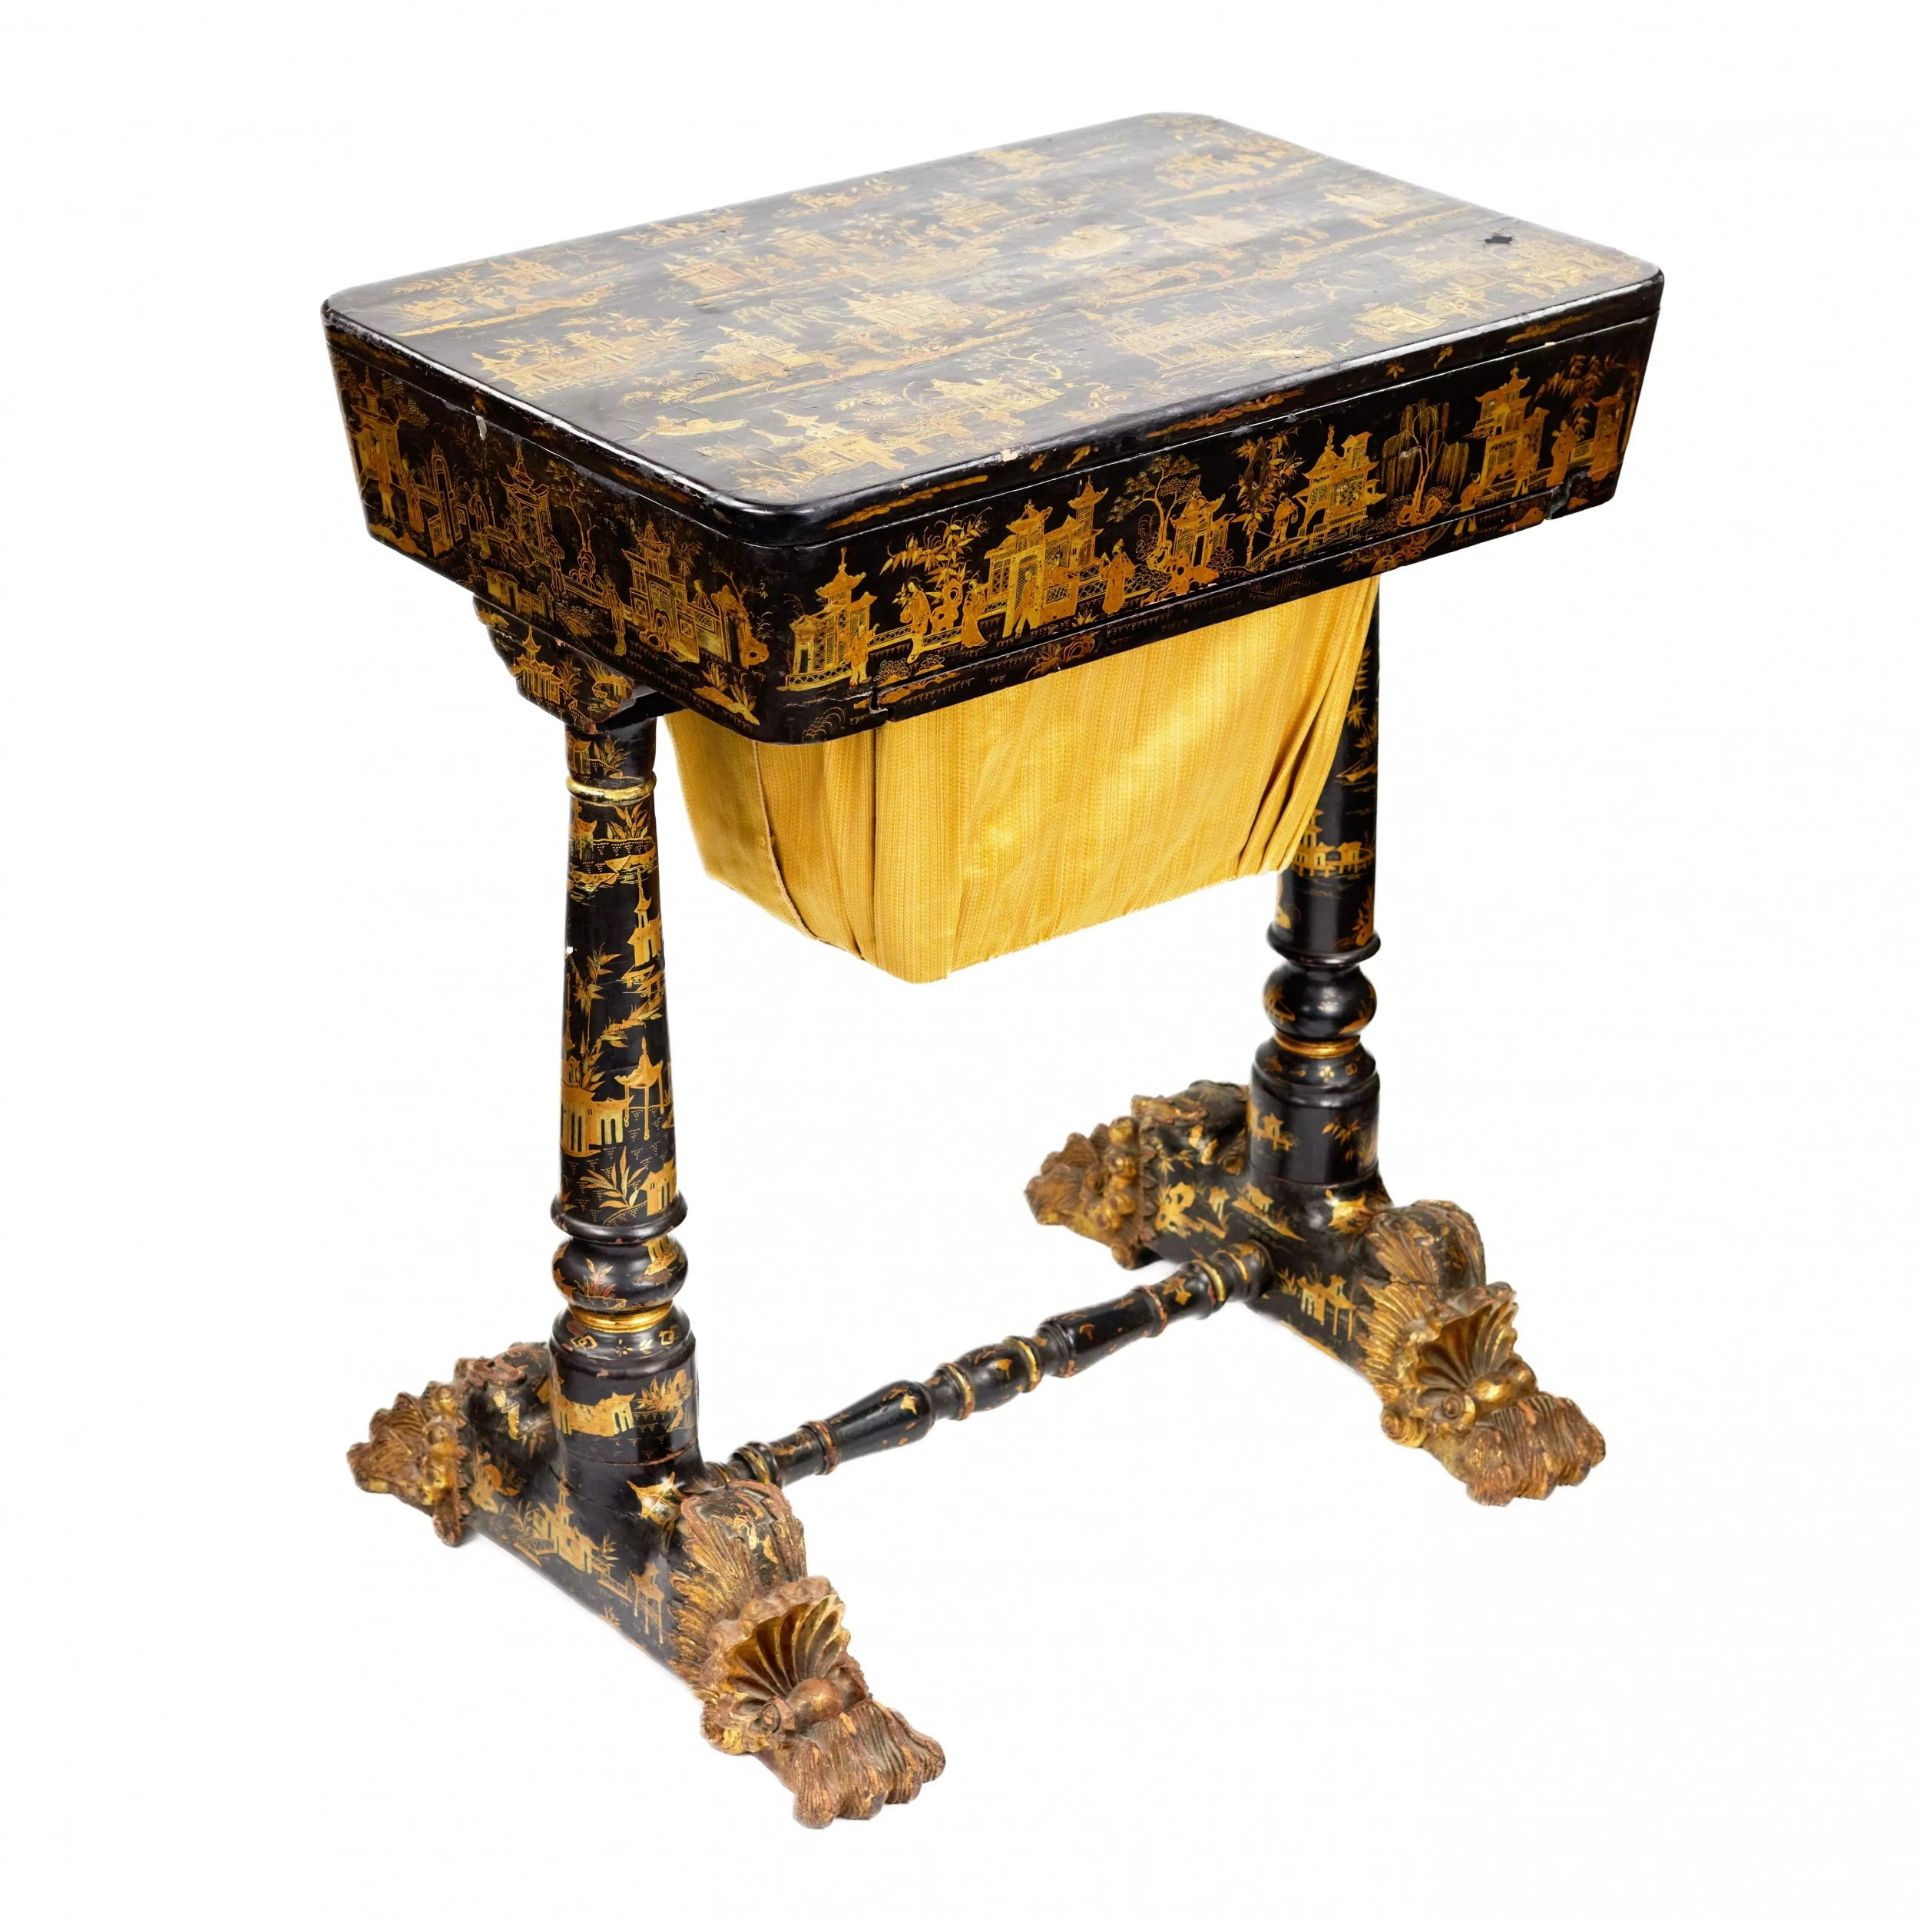 Needlework table made of black and gold Beijing lacquer. 19th century. - Image 2 of 11